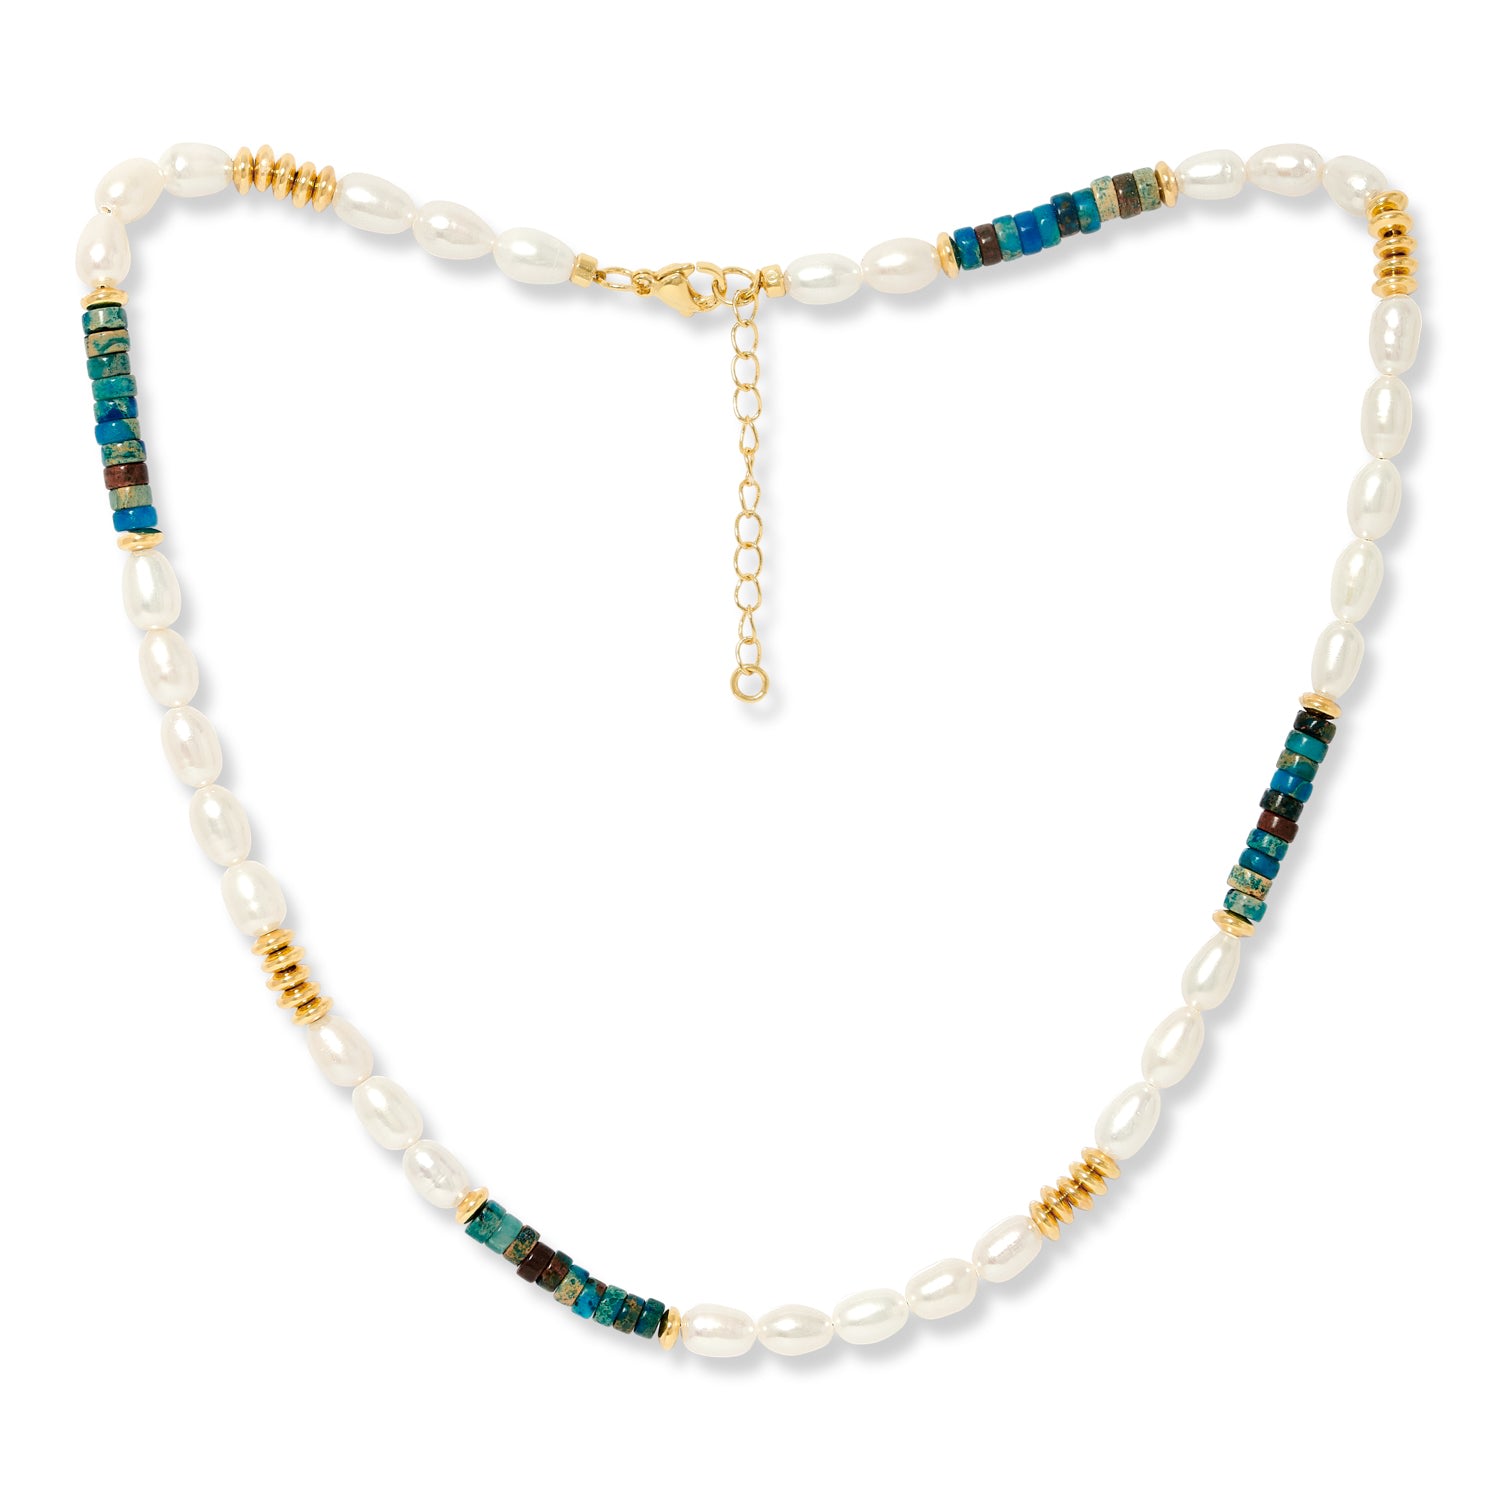 Women’s White / Blue Nova Oval Cultured Freshwater Pearl Necklace With Blue Jasper & Gold Beads Pearls of the Orient Online